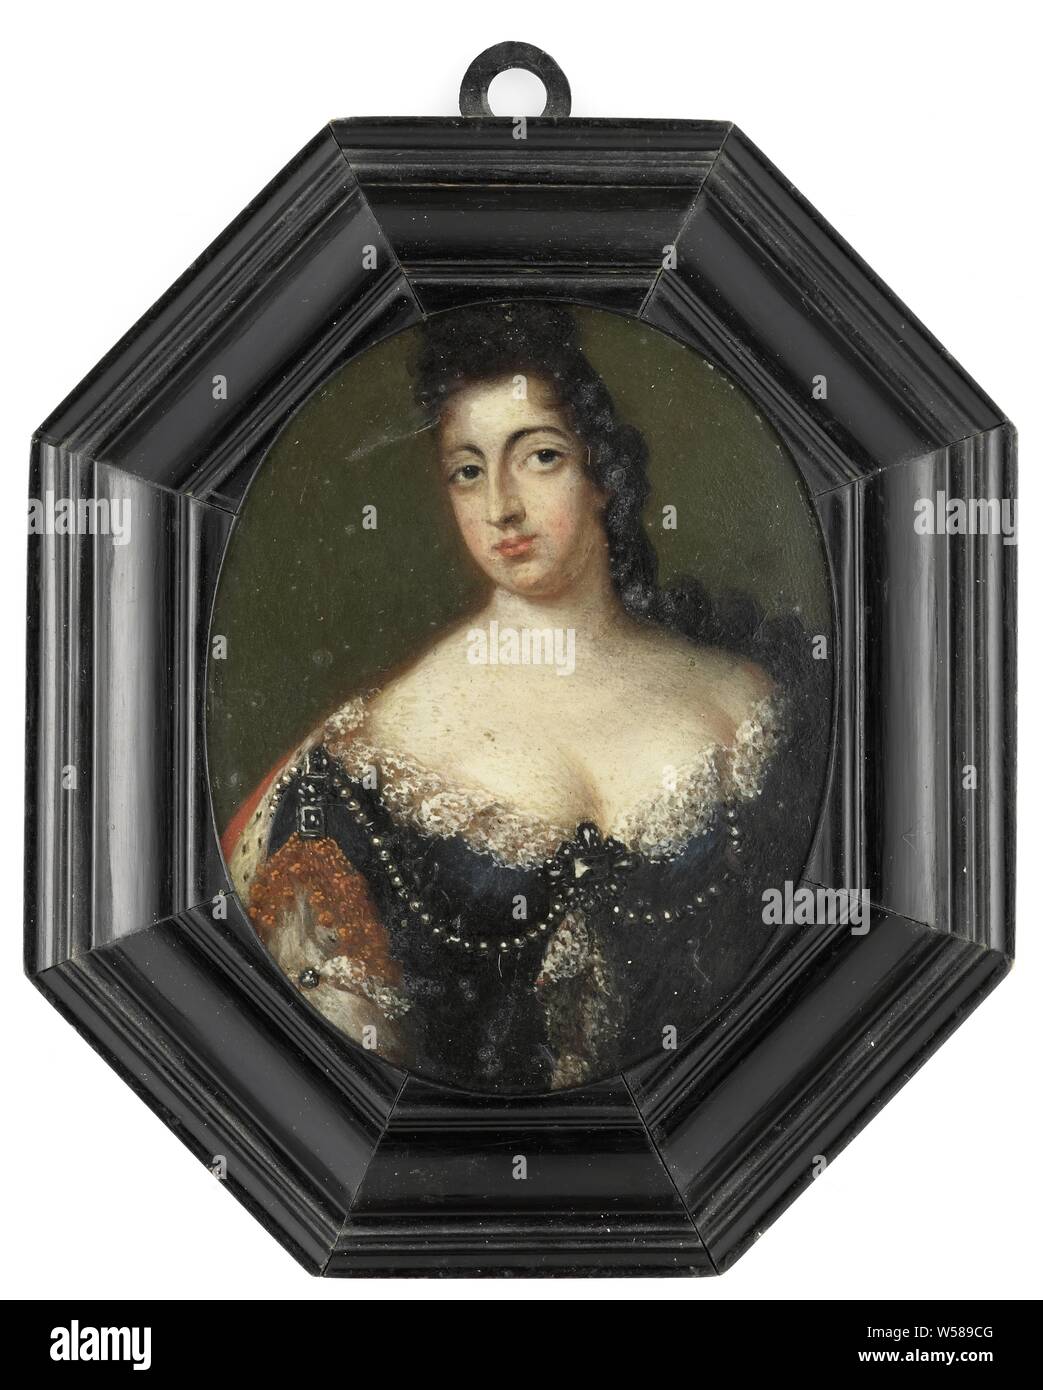 Portrait of Mary, Princess or Orange, Consort of William III, Portrait of Maria Stuart (1662-95) Wife of William III. Bust in oval, the gaze directed upwards. Scotland and Ireland), anonymous, Northern Netherlands, c. 1695, tin (metal), oil paint (paint), wood (plant material), h 9.1 cm × w 7.3 cm h 13.4 cm × w 10.6 cm × d 1.6 cm Stock Photo